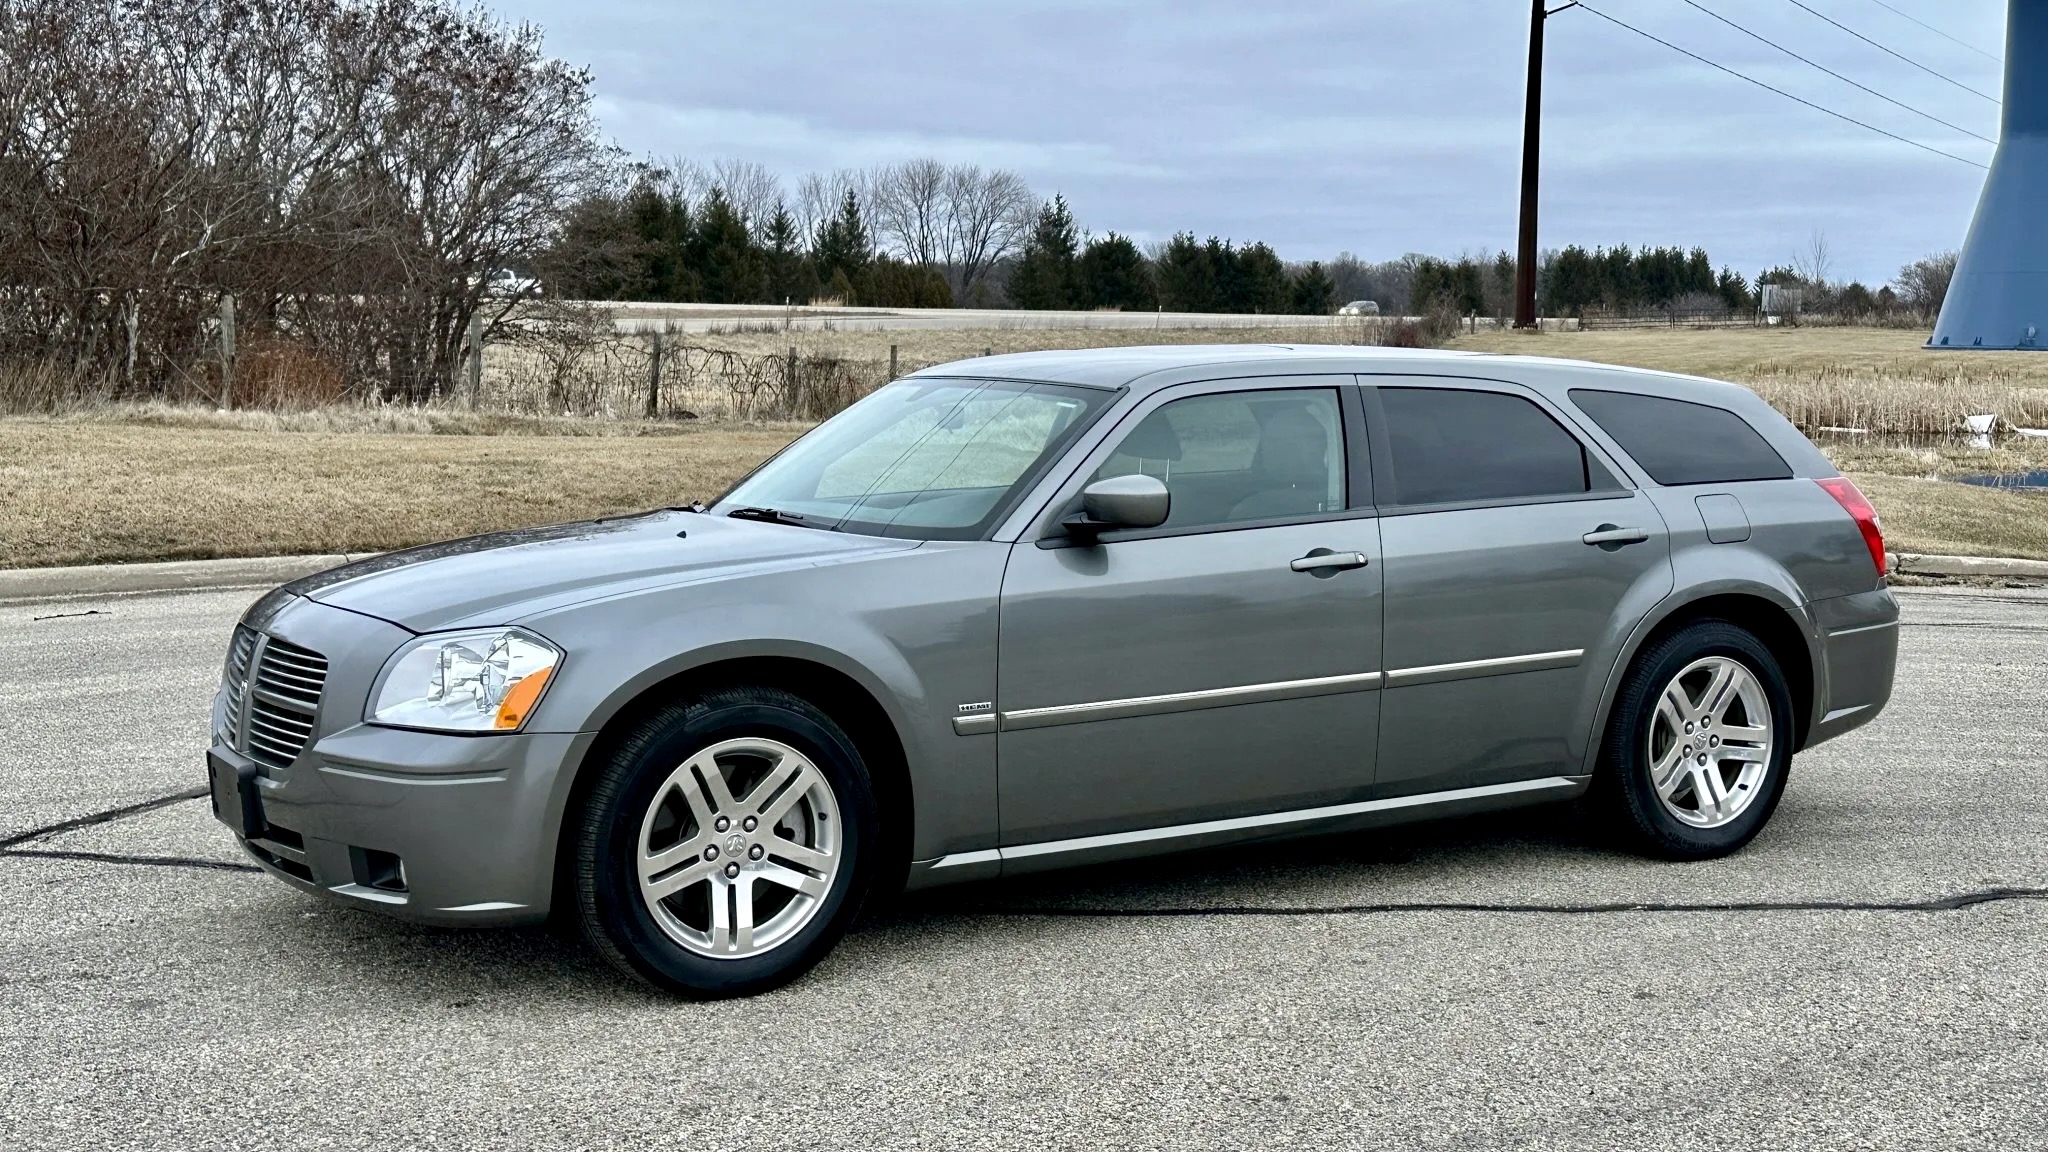 AUCTION: 2005 Dodge Magnum RT With Only 3,200 Miles On The Odometer -  MoparInsiders